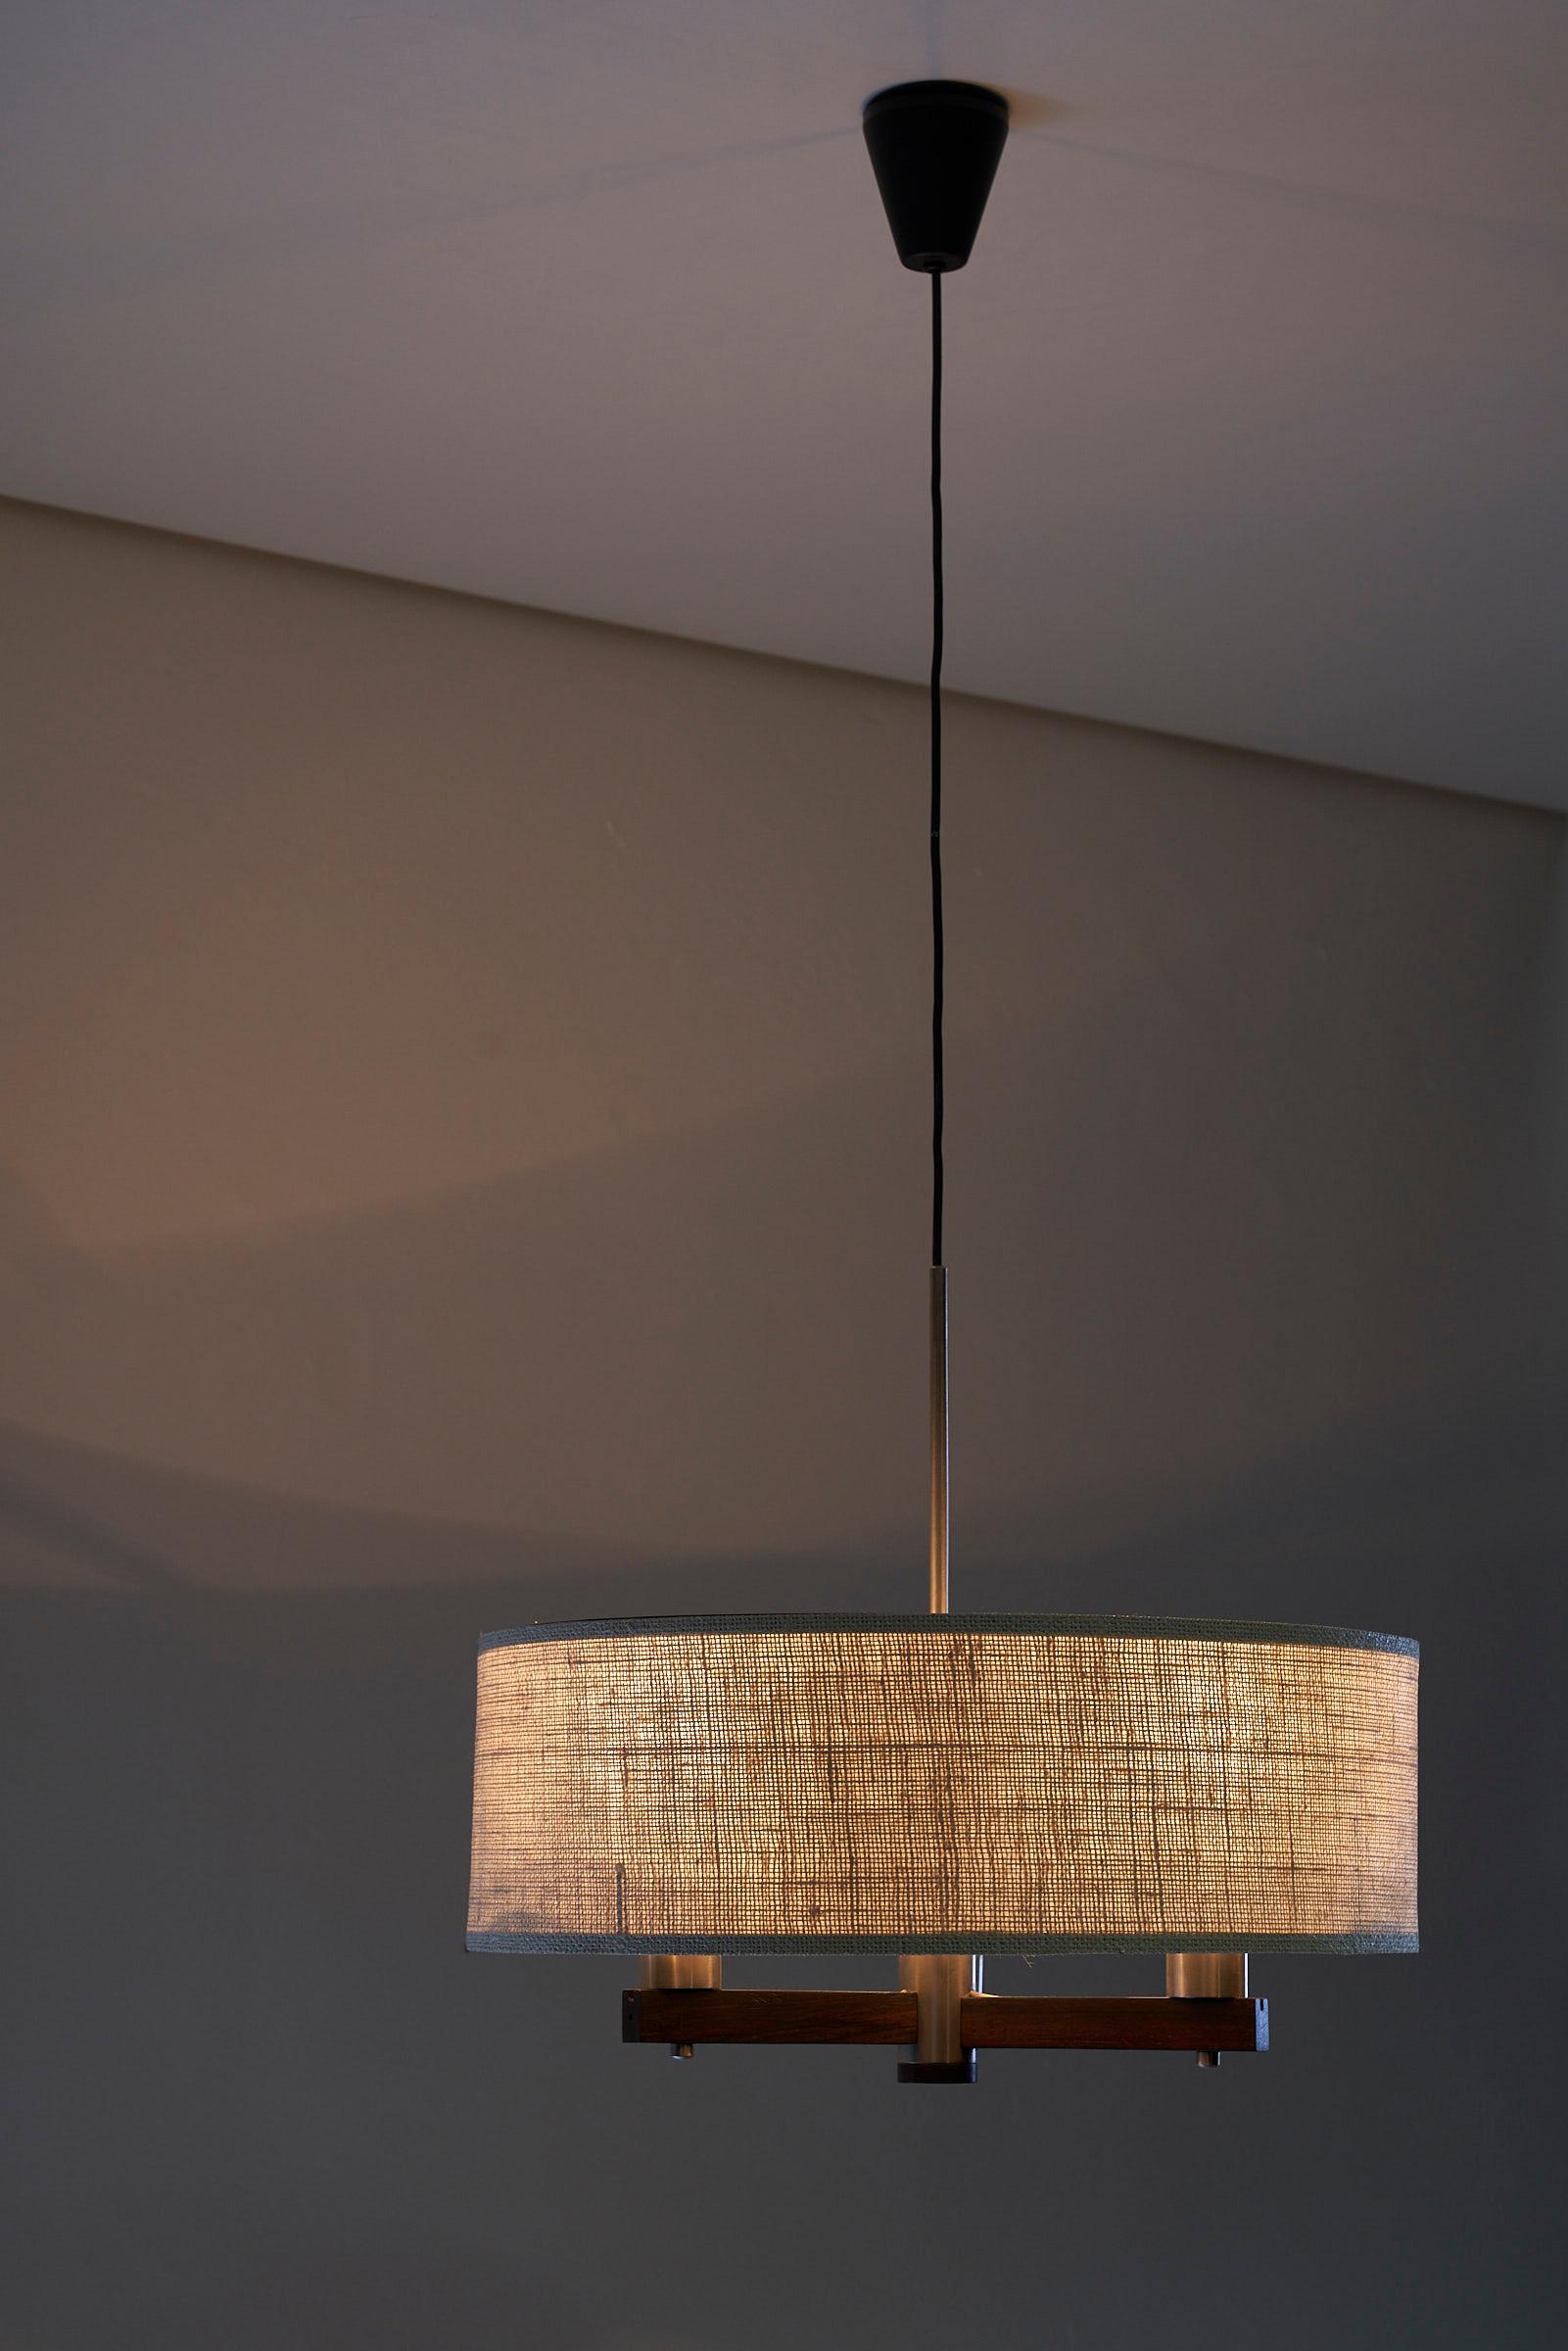 Introducing a captivating chandelier by Atelje Lyktan, a masterpiece that effortlessly combines elegance and functionality. This exquisite chandelier features wooden arms, a plexi diffuser surrounding the lightpoint, and a fabric shade enveloping